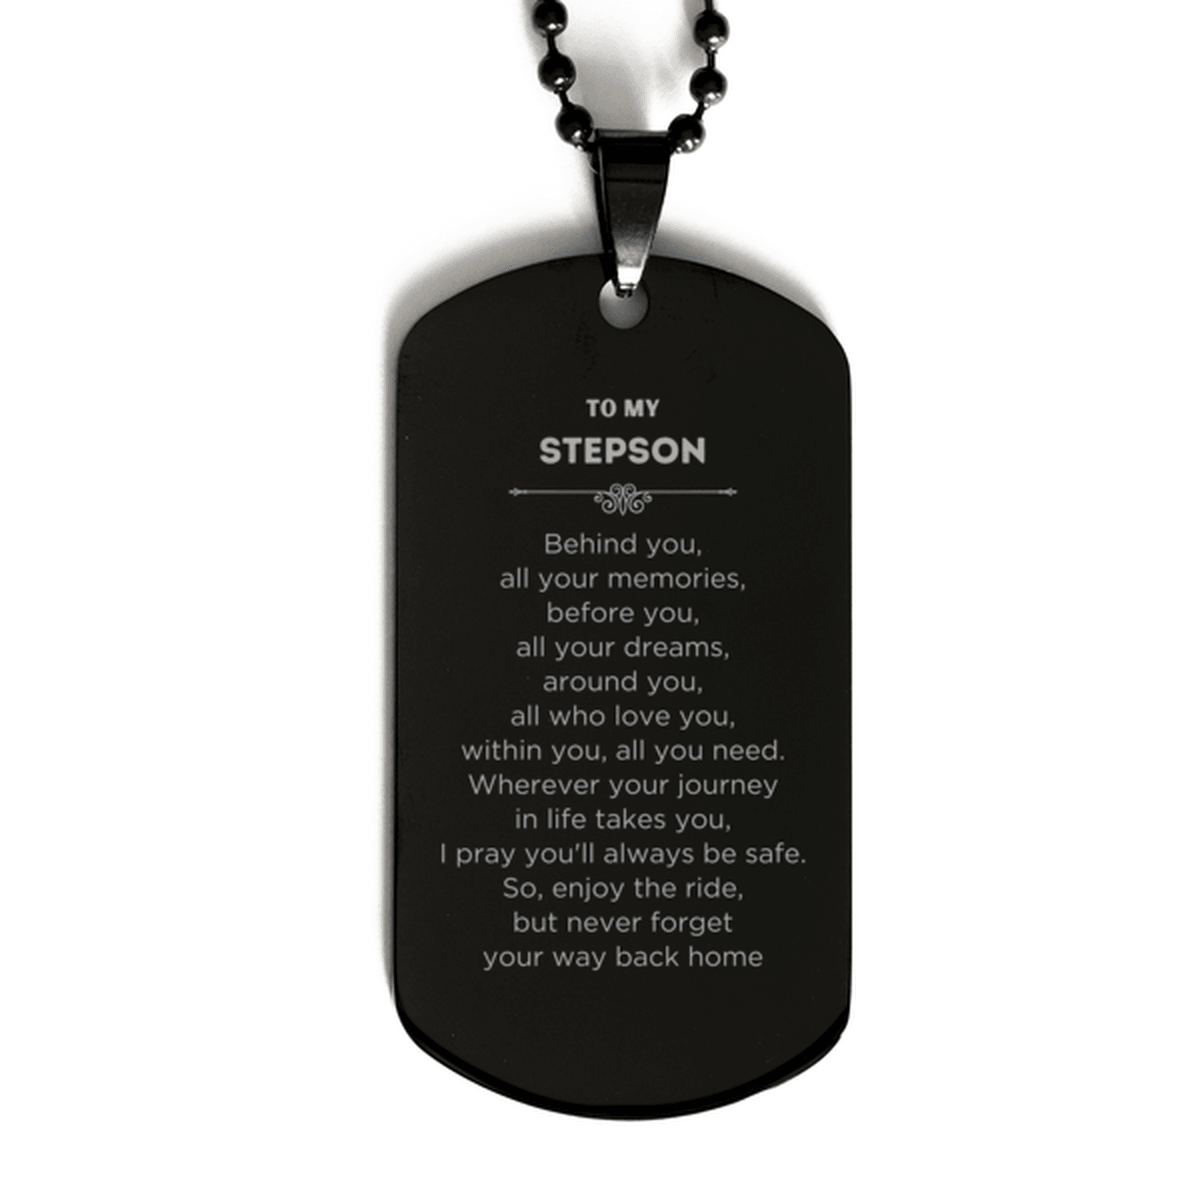 To My Stepson Gifts, Inspirational Stepson Black Dog Tag, Sentimental Birthday Christmas Unique Gifts For Stepson Behind you, all your memories, before you, all your dreams, around you, all who love you, within you, all you need - Mallard Moon Gift Shop